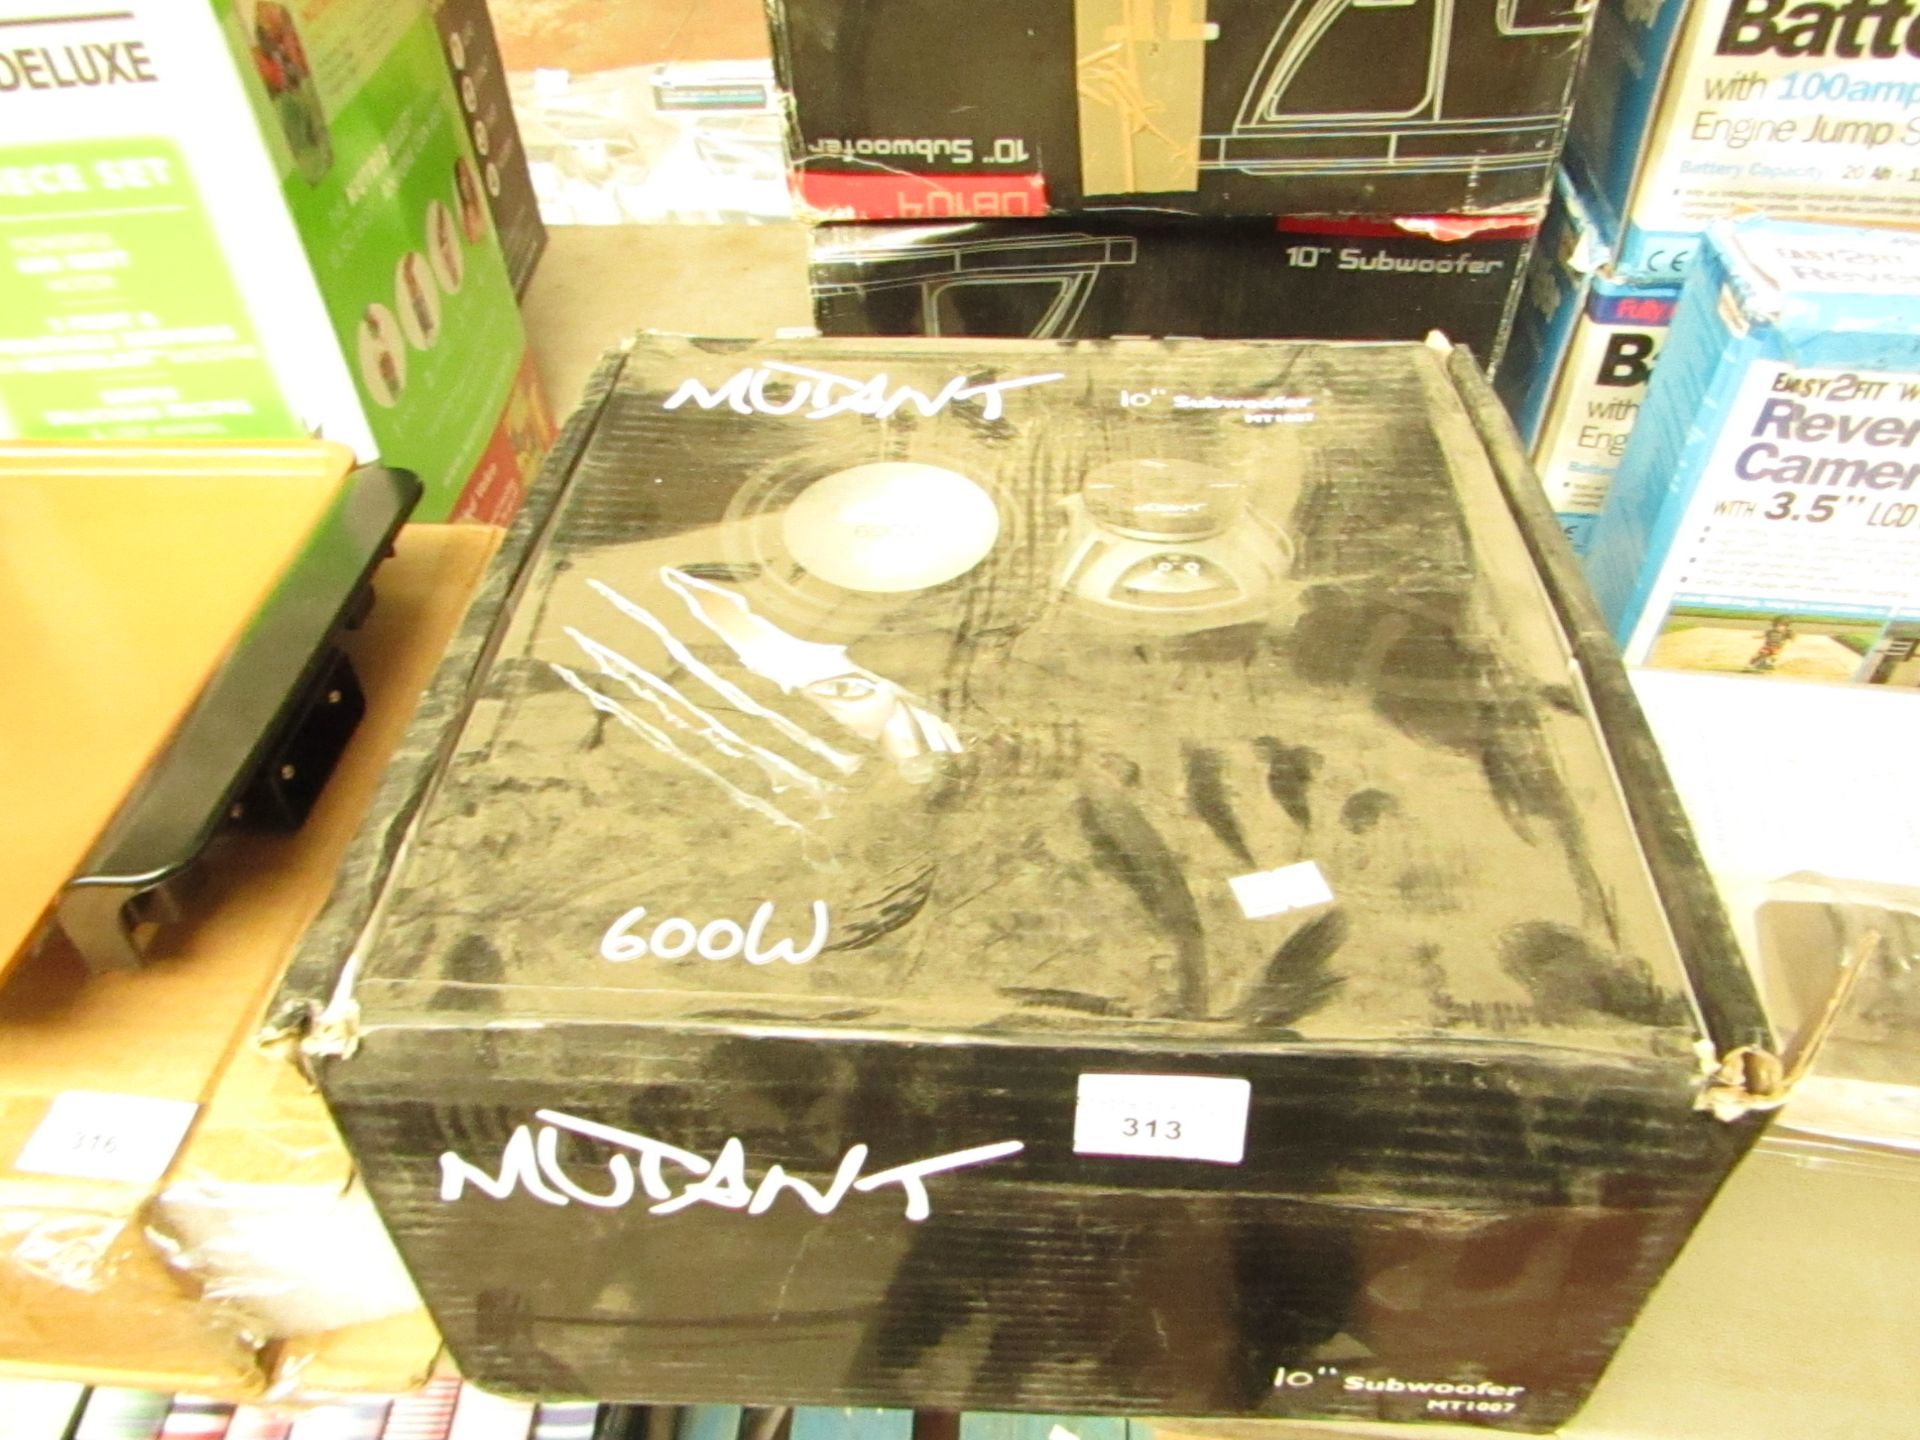 Mutant 600w 10" subwoofer, untested and boxed.